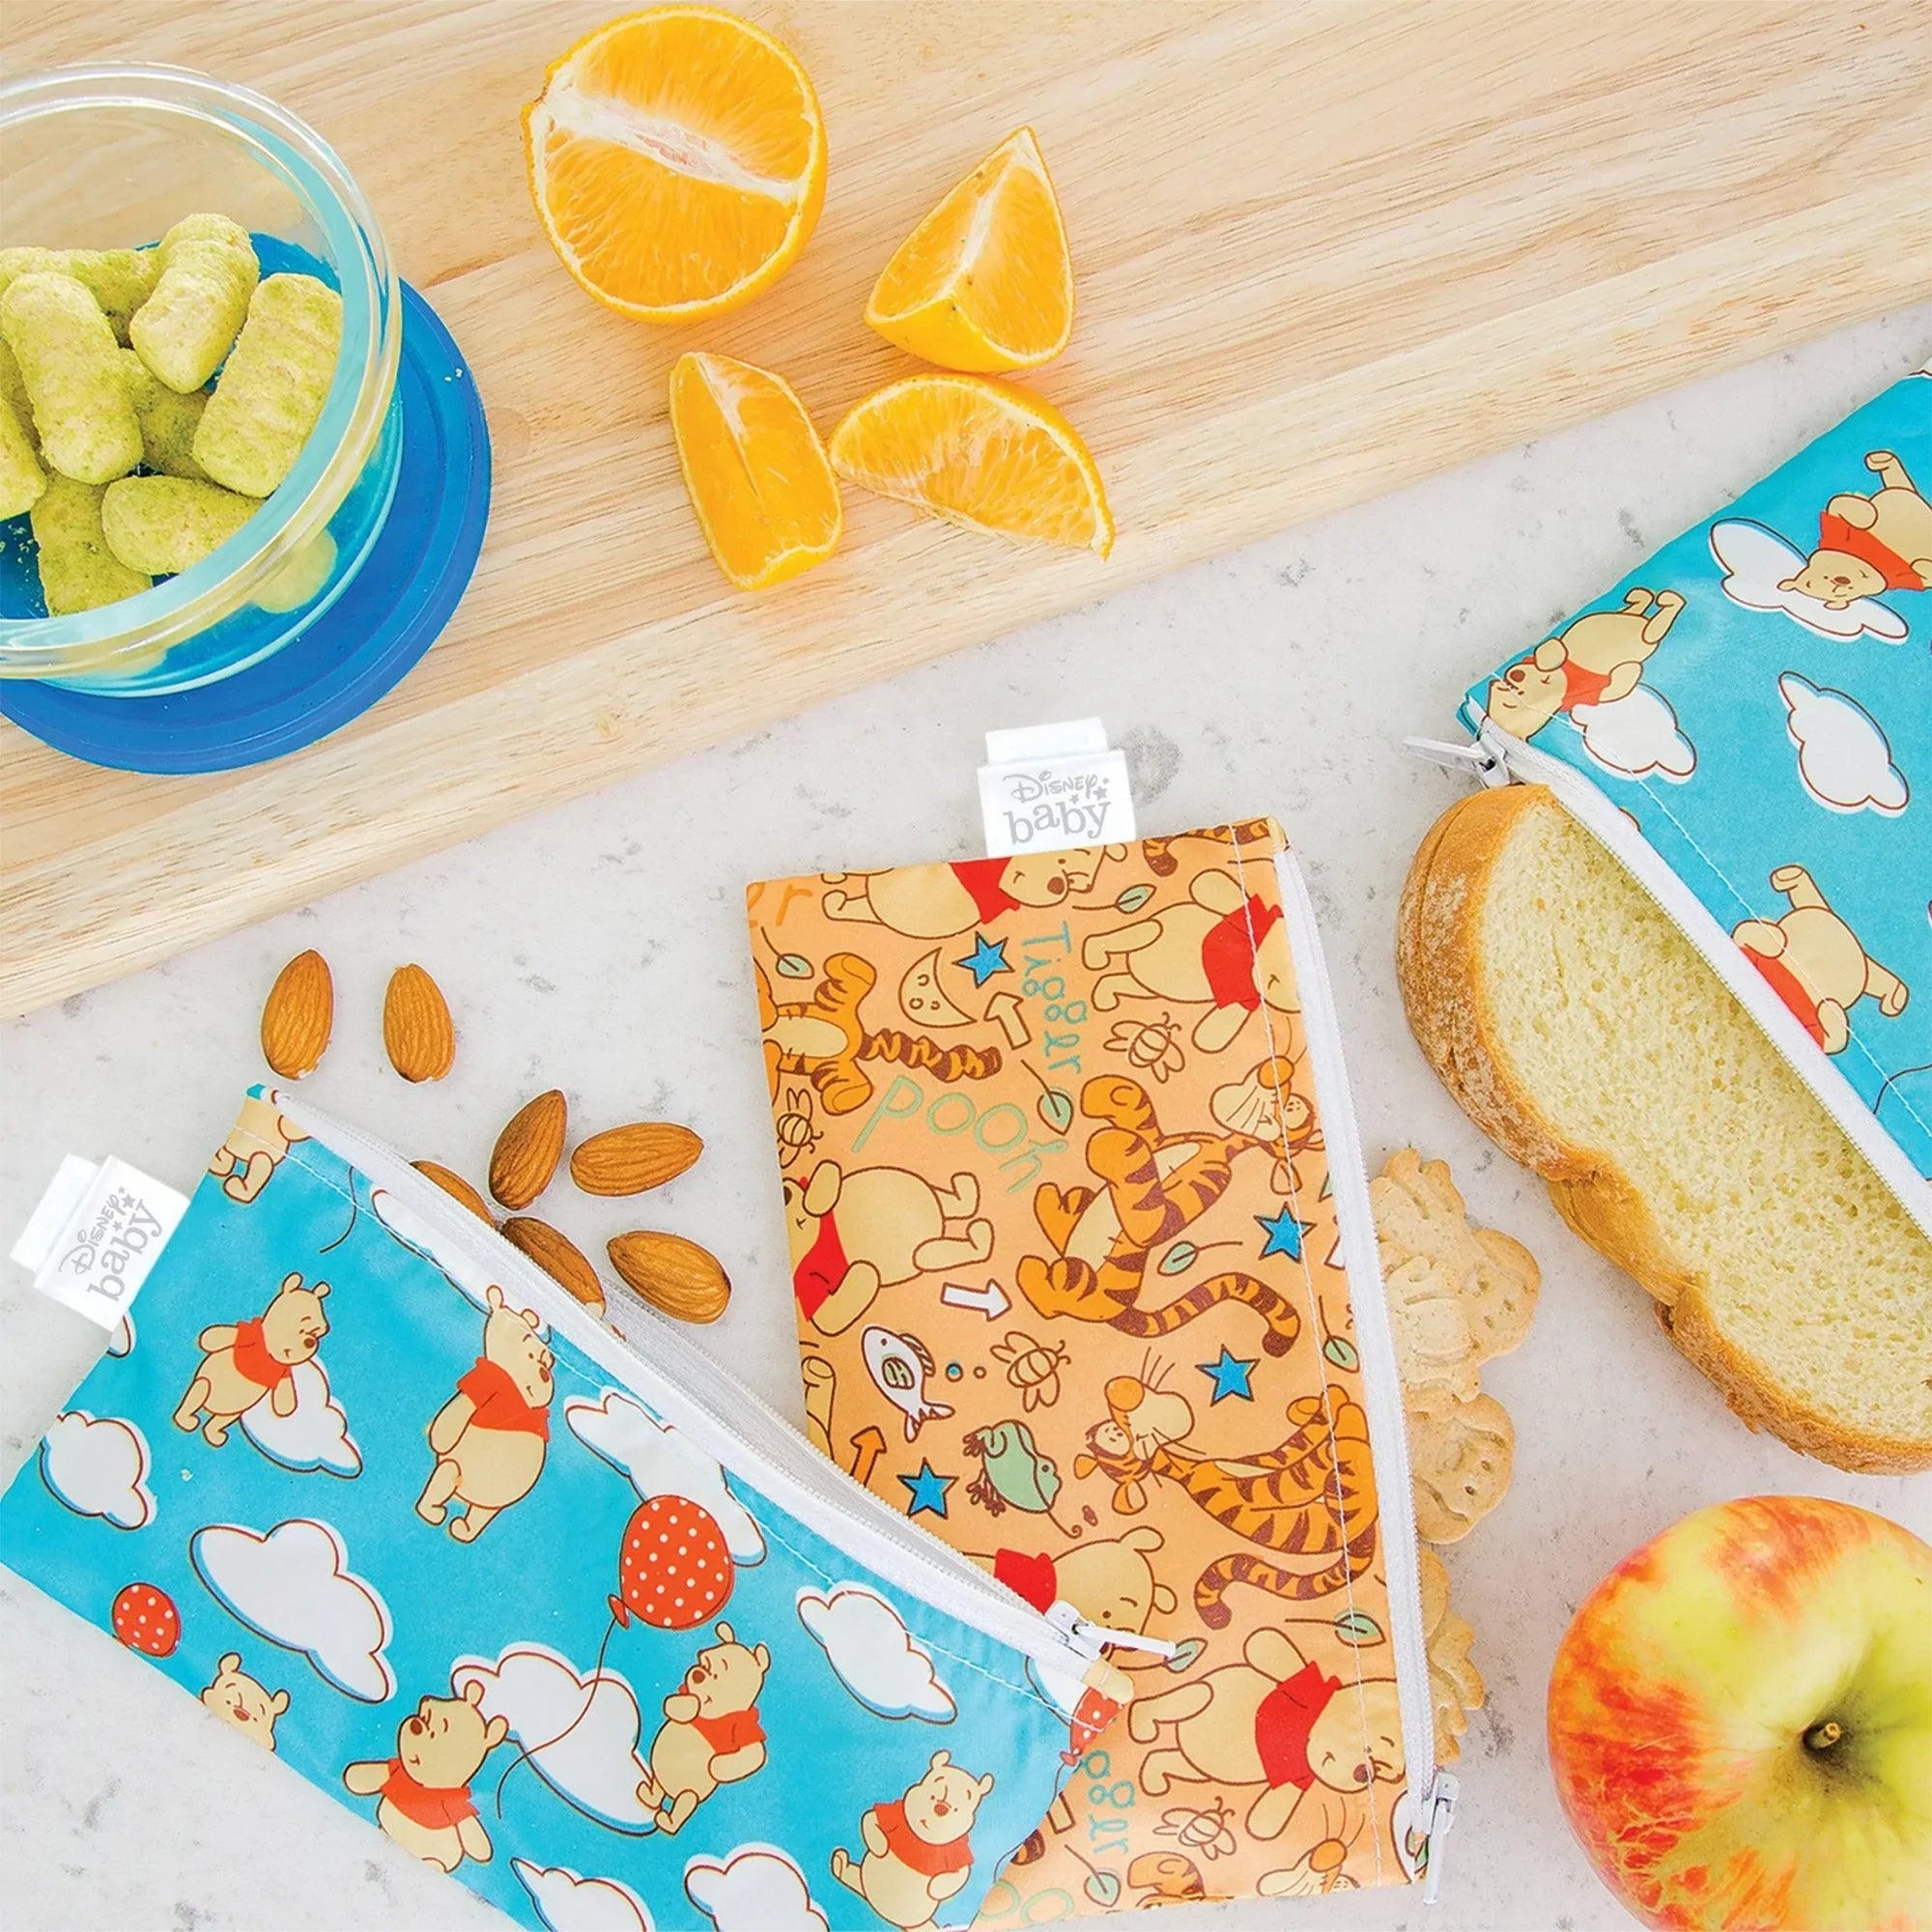 Reusable Snack Bag, Small 2-Pack: Winnie the Pooh - Bumkins